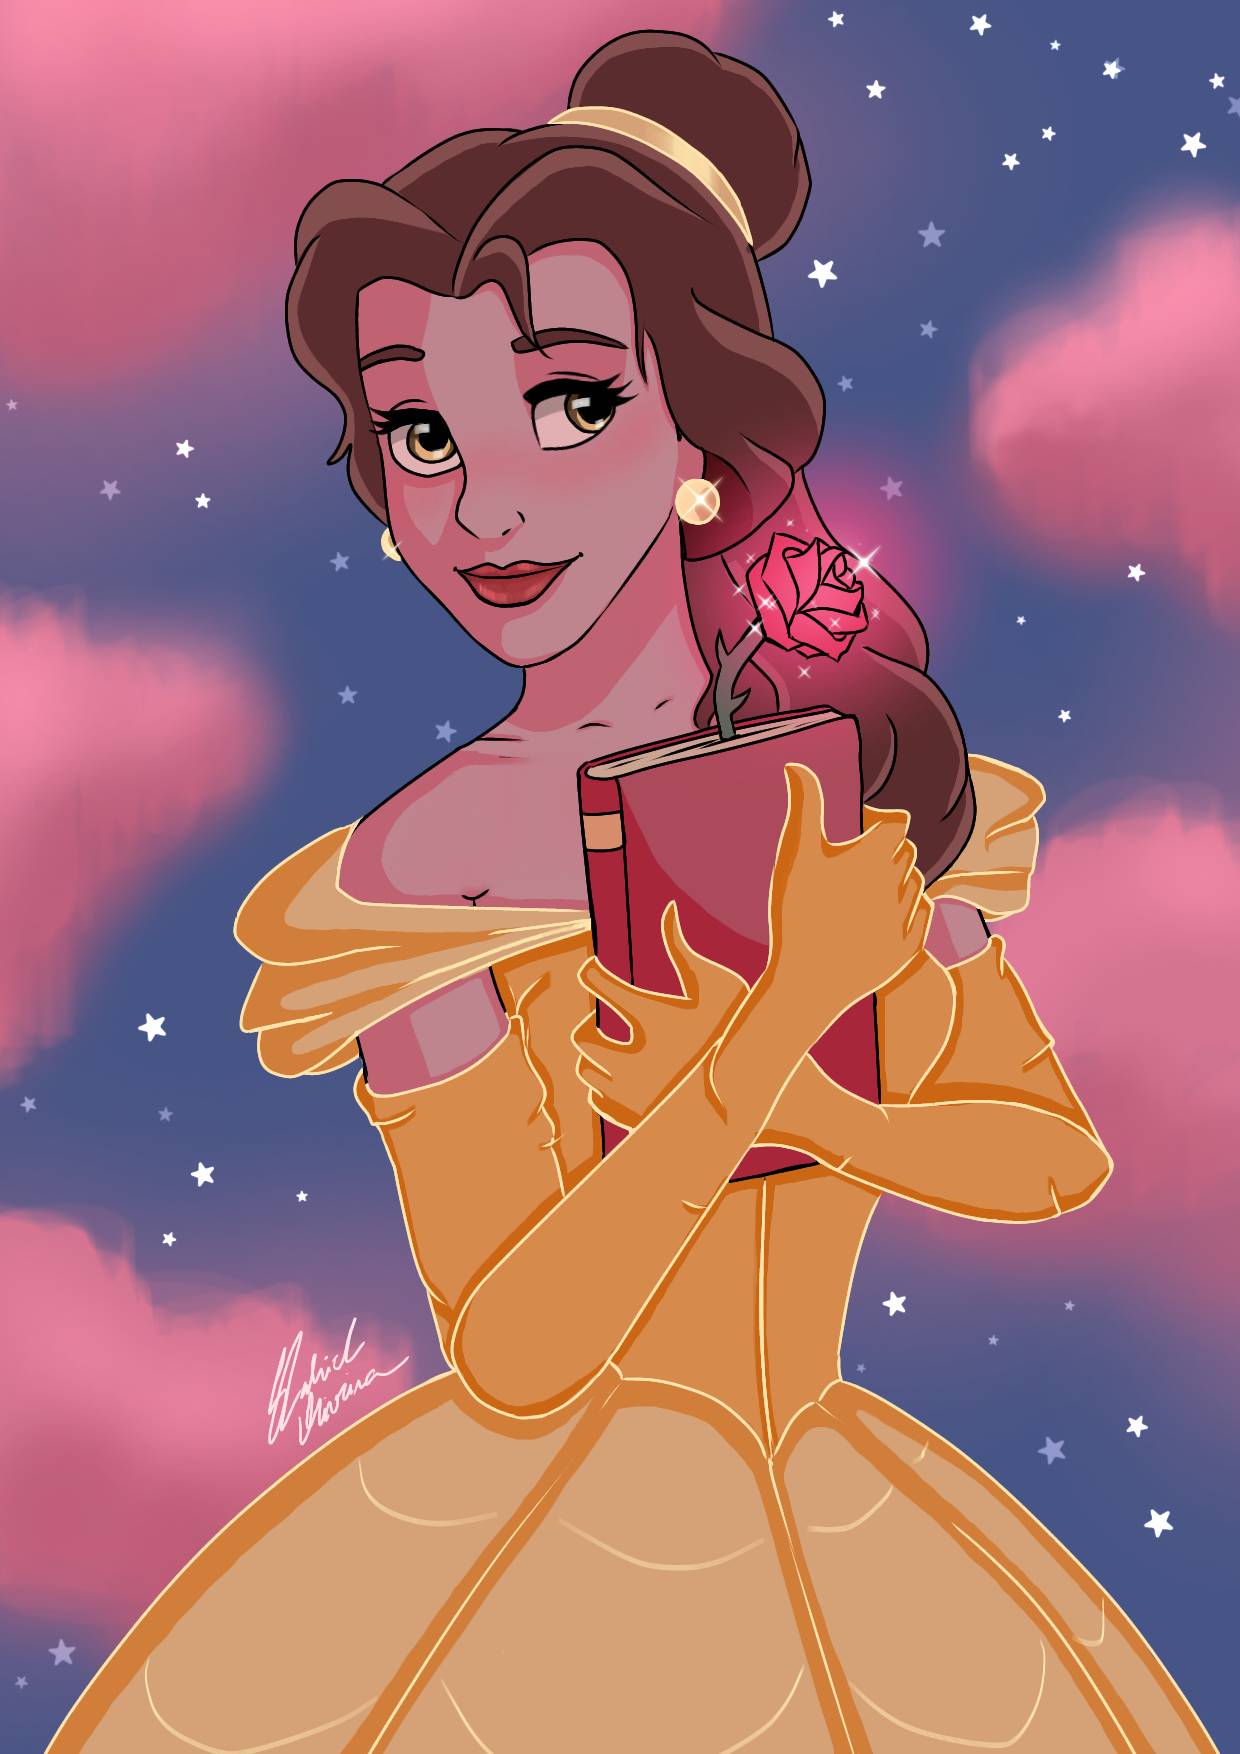 Princess Belle (Disney's Beauty and the Beast) by GabrielGeog on DeviantArt